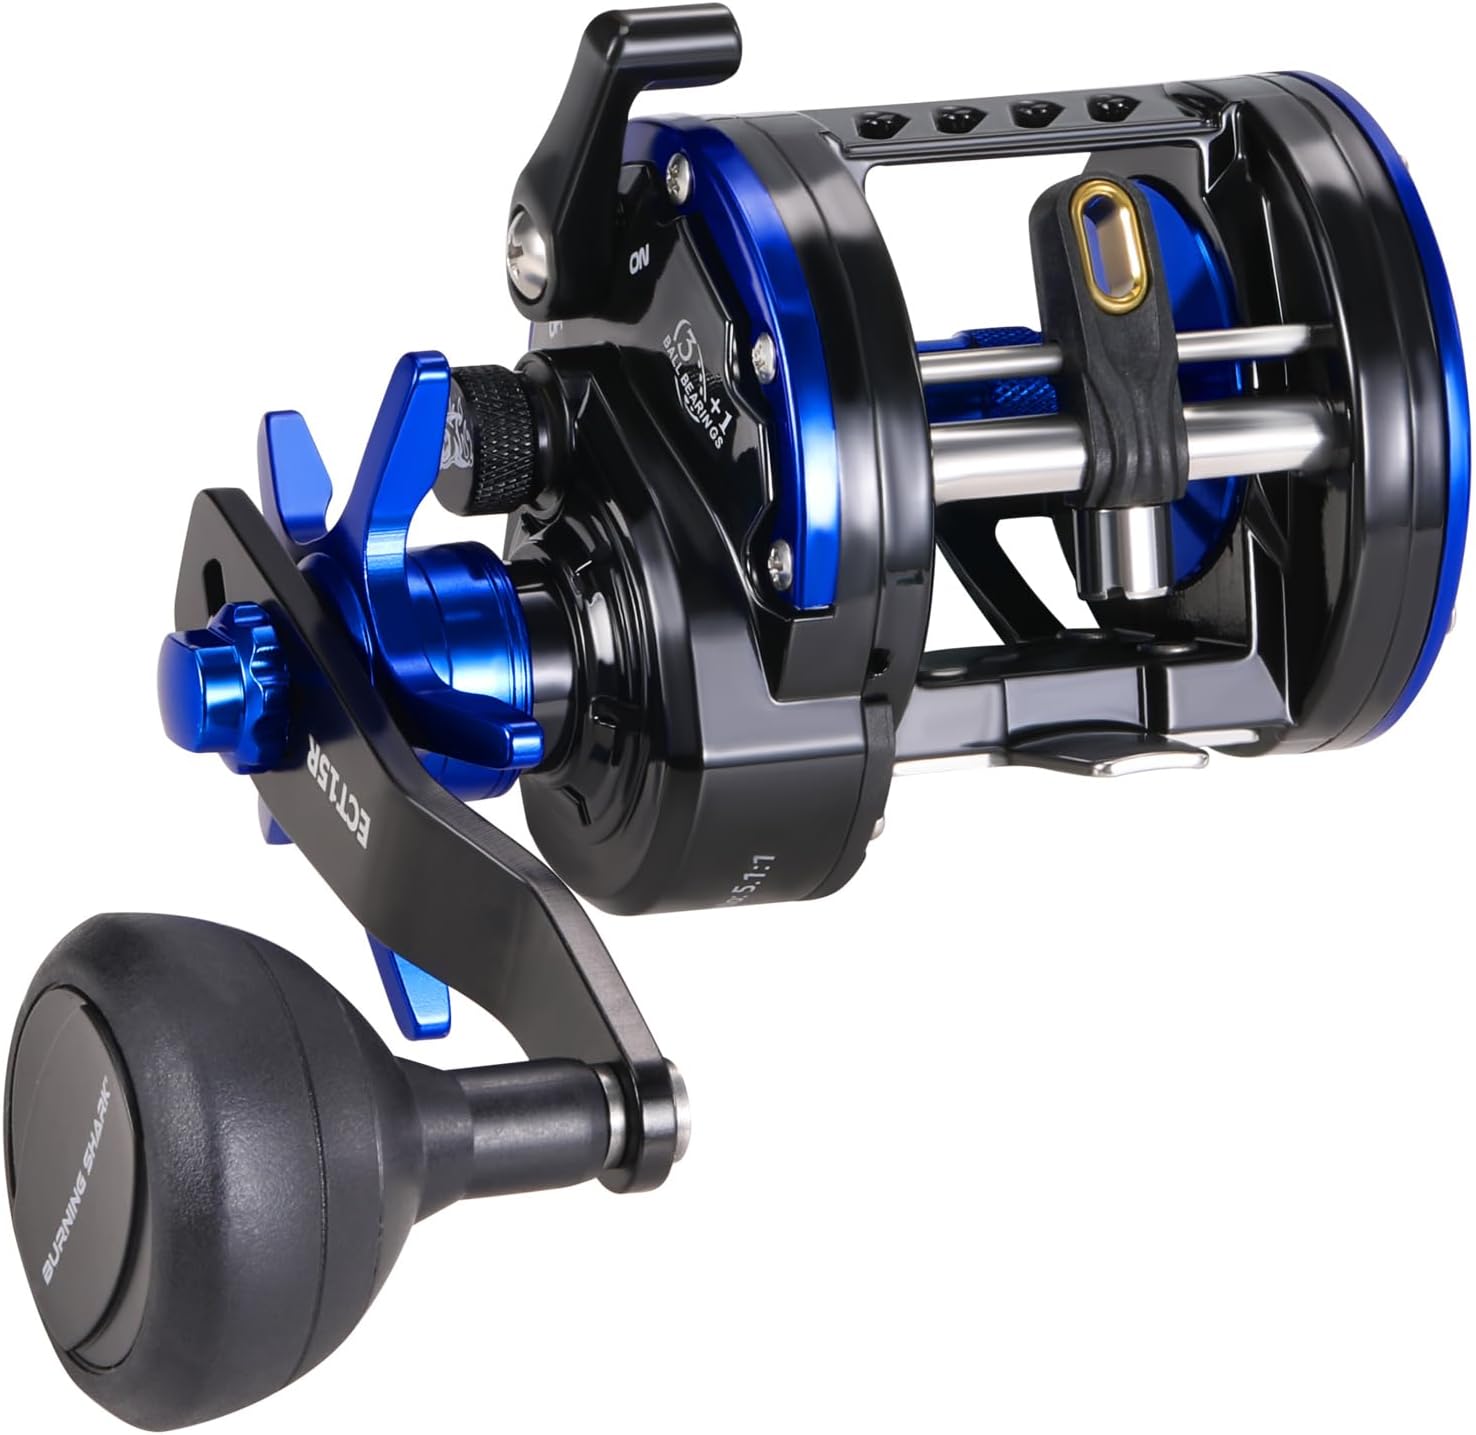 Burning Shark Baitcasting Fishing Reel, Smooth Powerful Round Baitcaster Reel, Saltwater Inshore Surf Trolling Reel, Conventional Reel For Catfish, Musky, Bass, Pike